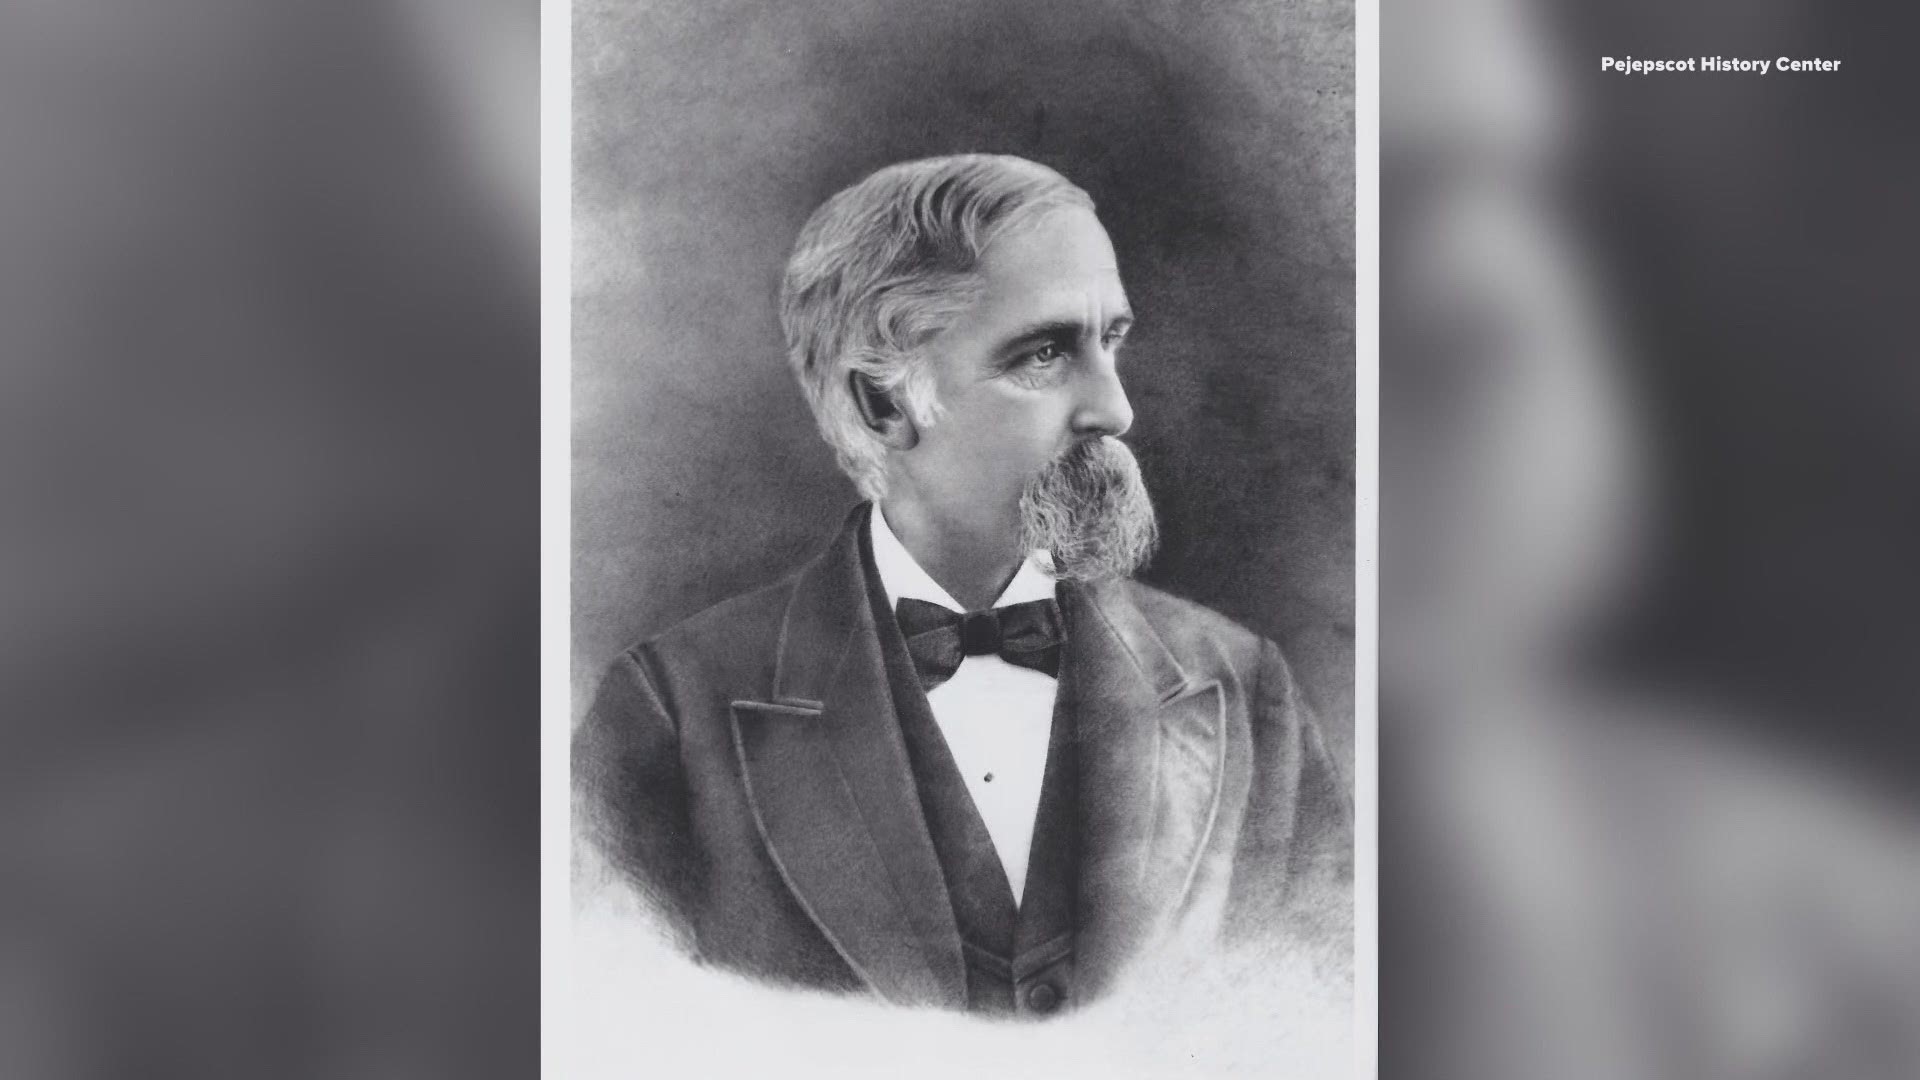 In 1880, Maine Governor Joshua Chamberlain was called to the State House in Augusta to confront a mob that disputed the newly elected governor.